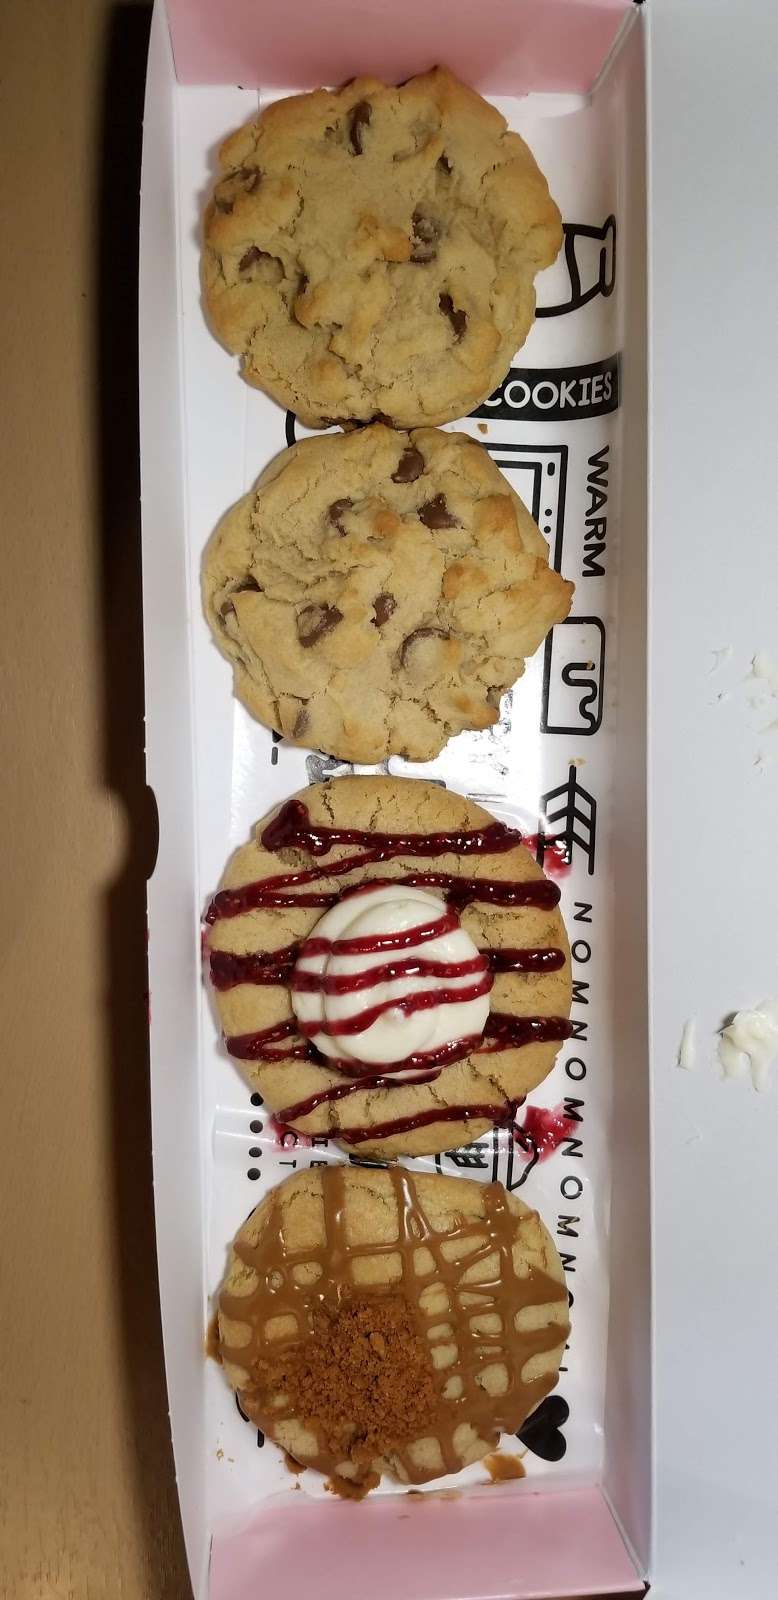 Crumbl Cookies | 14332 Lincoln St, Thornton, CO 80023 | Phone: (720) 791-6977